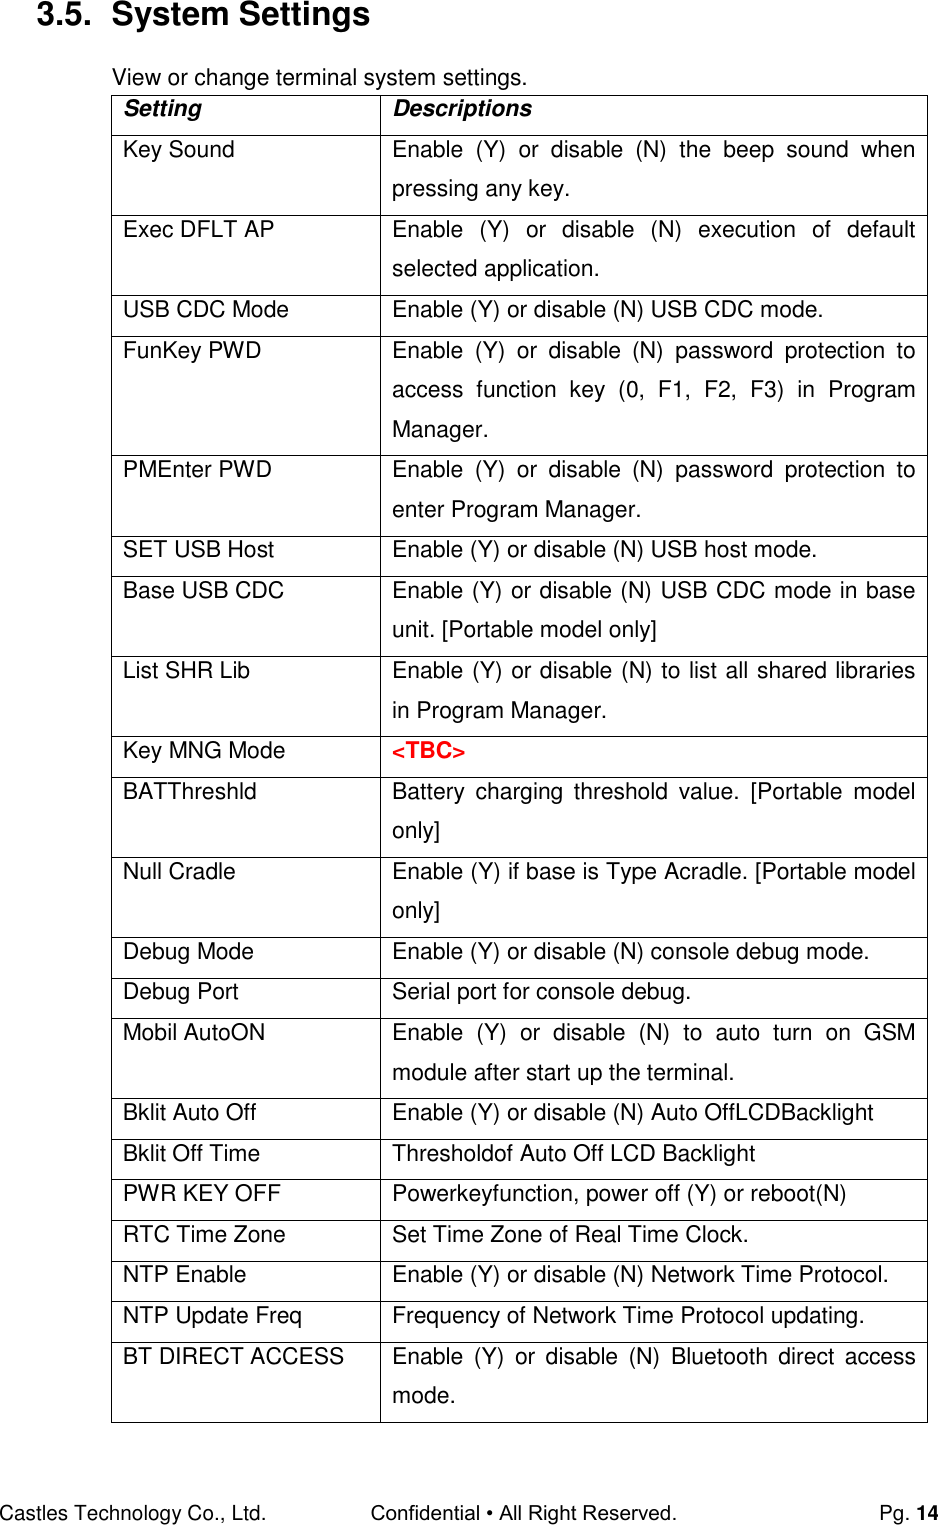 Castles Technology Co., Ltd. Confidential • All Right Reserved.  Pg. 14 3.5.  System Settings View or change terminal system settings. Setting Descriptions Key Sound Enable  (Y)  or  disable  (N)  the  beep  sound  when pressing any key. Exec DFLT AP Enable  (Y)  or  disable  (N)  execution  of  default selected application. USB CDC Mode Enable (Y) or disable (N) USB CDC mode. FunKey PWD Enable  (Y)  or  disable  (N)  password  protection  to access  function  key  (0,  F1,  F2,  F3)  in  Program Manager. PMEnter PWD Enable  (Y)  or  disable  (N)  password  protection  to enter Program Manager. SET USB Host Enable (Y) or disable (N) USB host mode. Base USB CDC Enable (Y) or disable (N) USB CDC mode in base unit. [Portable model only] List SHR Lib Enable (Y) or disable (N) to list all shared libraries in Program Manager. Key MNG Mode &lt;TBC&gt; BATThreshld Battery  charging  threshold  value.  [Portable  model only] Null Cradle Enable (Y) if base is Type Acradle. [Portable model only] Debug Mode Enable (Y) or disable (N) console debug mode. Debug Port Serial port for console debug. Mobil AutoON Enable  (Y)  or  disable  (N)  to  auto  turn  on  GSM module after start up the terminal. Bklit Auto Off Enable (Y) or disable (N) Auto OffLCDBacklight Bklit Off Time Thresholdof Auto Off LCD Backlight PWR KEY OFF Powerkeyfunction, power off (Y) or reboot(N)  RTC Time Zone Set Time Zone of Real Time Clock. NTP Enable Enable (Y) or disable (N) Network Time Protocol. NTP Update Freq Frequency of Network Time Protocol updating. BT DIRECT ACCESS Enable  (Y)  or  disable  (N)  Bluetooth  direct  access mode. 